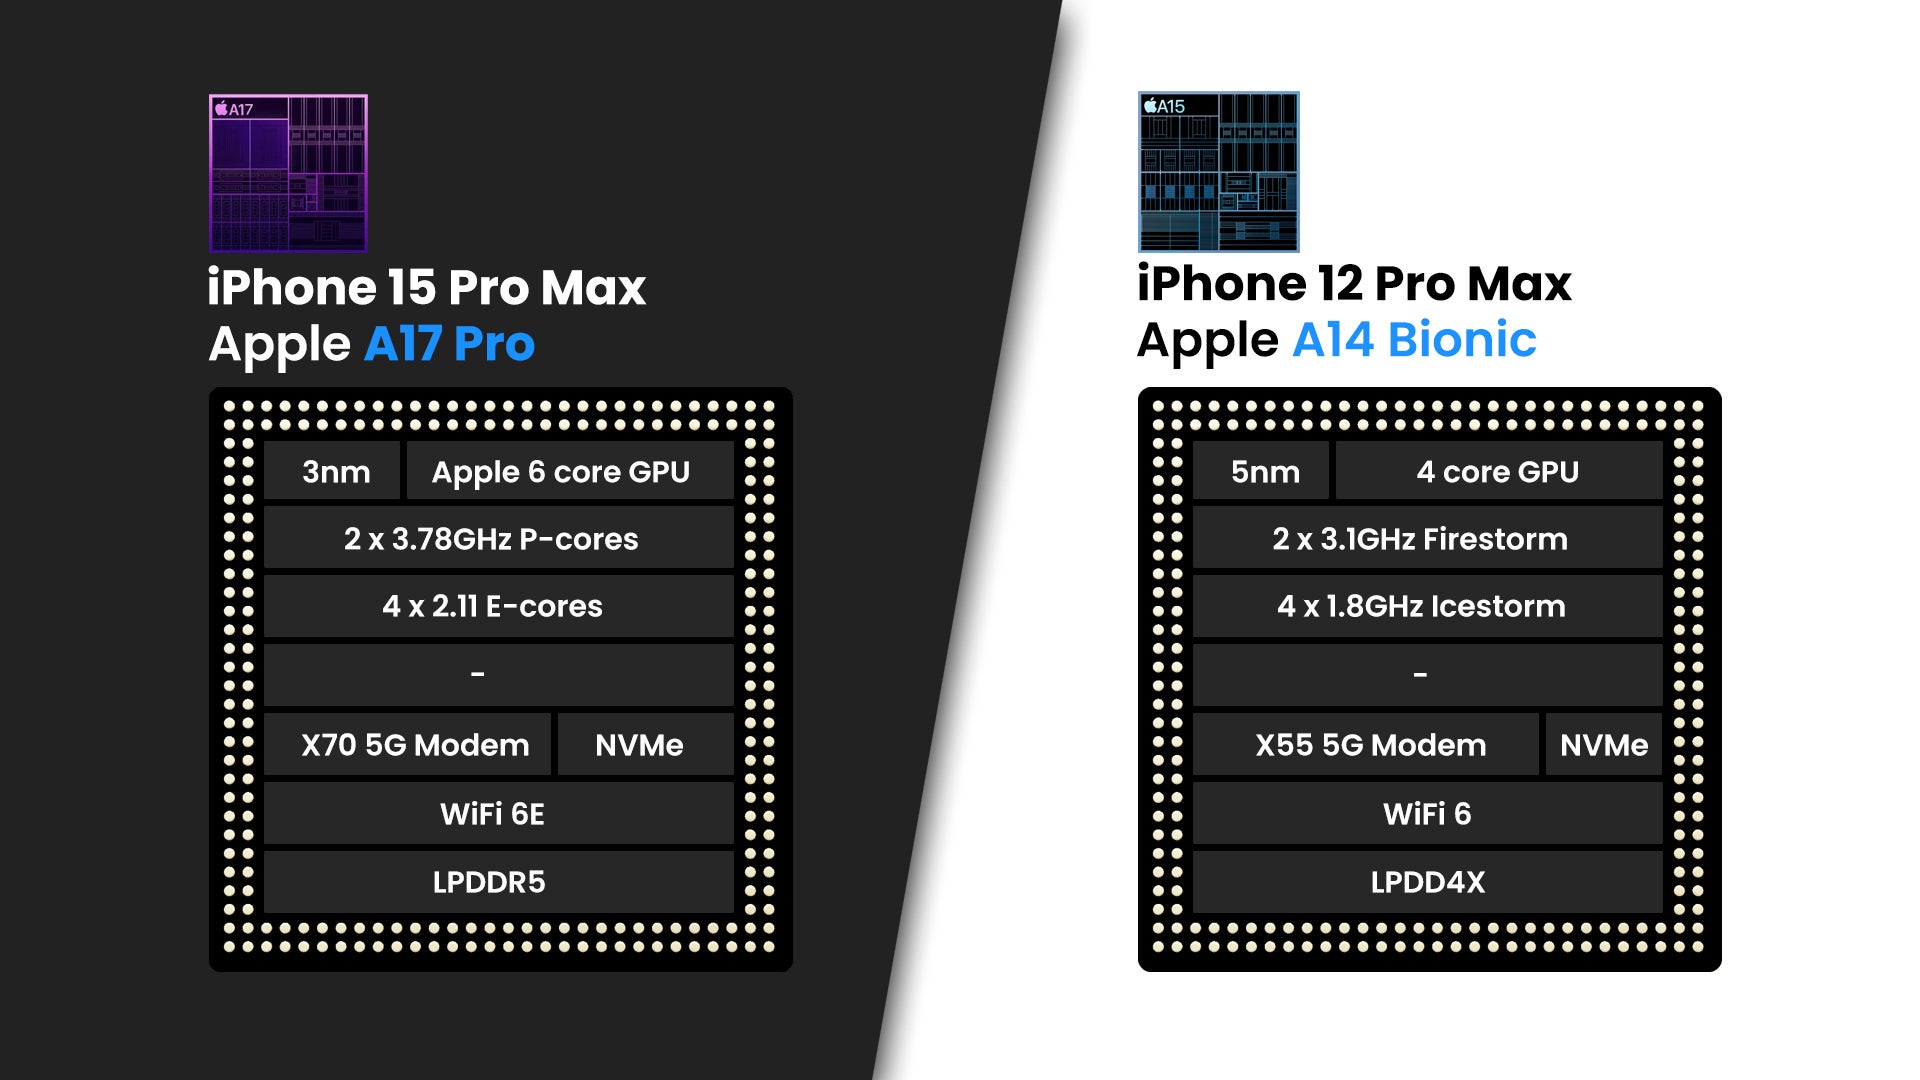 (Image credit - PhoneArena) - iPhone 15 Pro Max vs iPhone 12 Pro Max: Time to upgrade, stat!